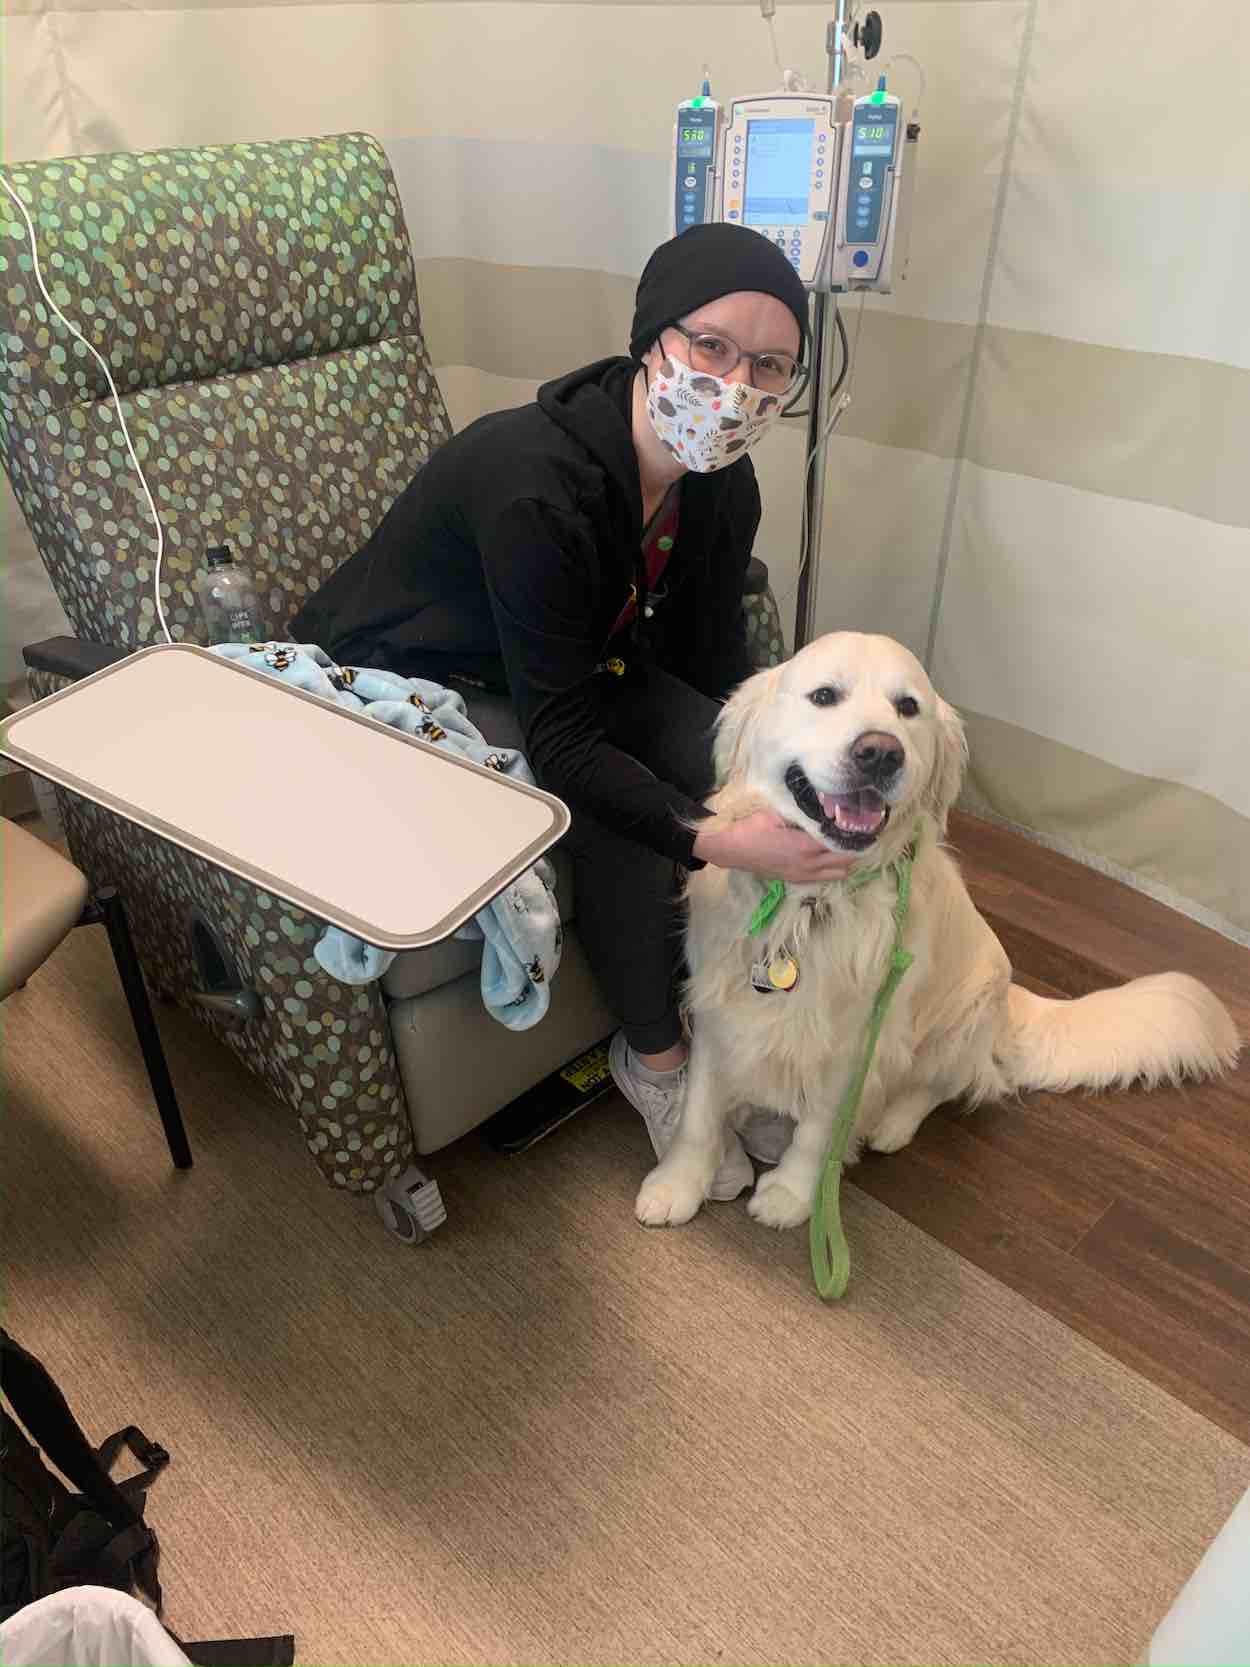 Heidi Myers spends time with a therapy dog during a chemo session at West Cancer Center in Germantown, Tennessee. Submitted photo